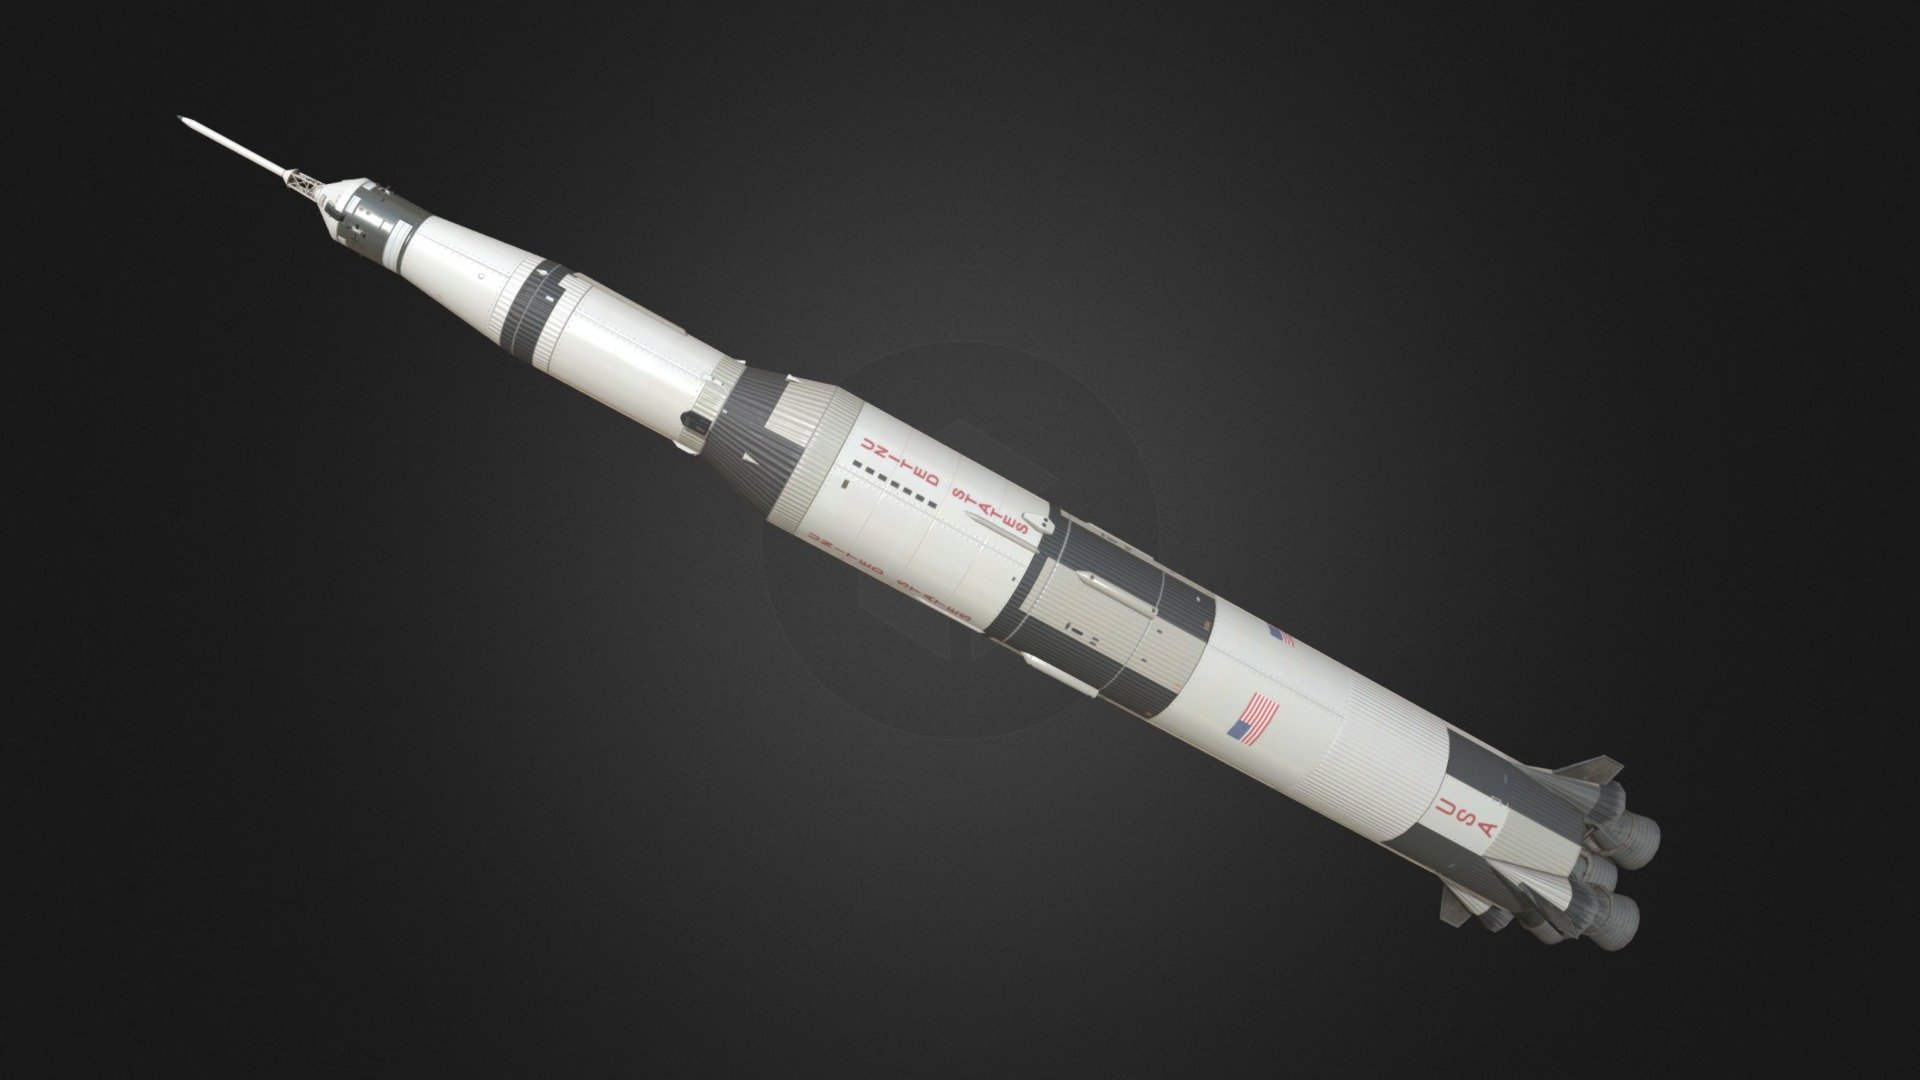 Saturn V Spacecraft
This product is an optimized model with excellent texturing for realistic and faster rendering.

The model has an optimized low poly mesh with the greatest possible number of simplifications that do not affect photo-realism but can help to simplify it, thus lightening your scene and allowing for using this model in real-time 3d applications.

Real-world accurate model. Correctly scale modeled to represent precisely like in the real world.

In this product, all objects are ERROR-FREE. All LEGAL Geometry. Subdivisions are not required for this product.

Perfect for Architectural, Product visualization, Game Engine, and VR (Virtual Reality) No Plugin Needed.

Format Type




3ds Max 2017 (with physical PBR Shader)

FBX

OBJ

3DS

You might need to re-assign textures map to model in your relevant software - Saturn V Spacecraft - Buy Royalty Free 3D model by webcraft3d 3d model